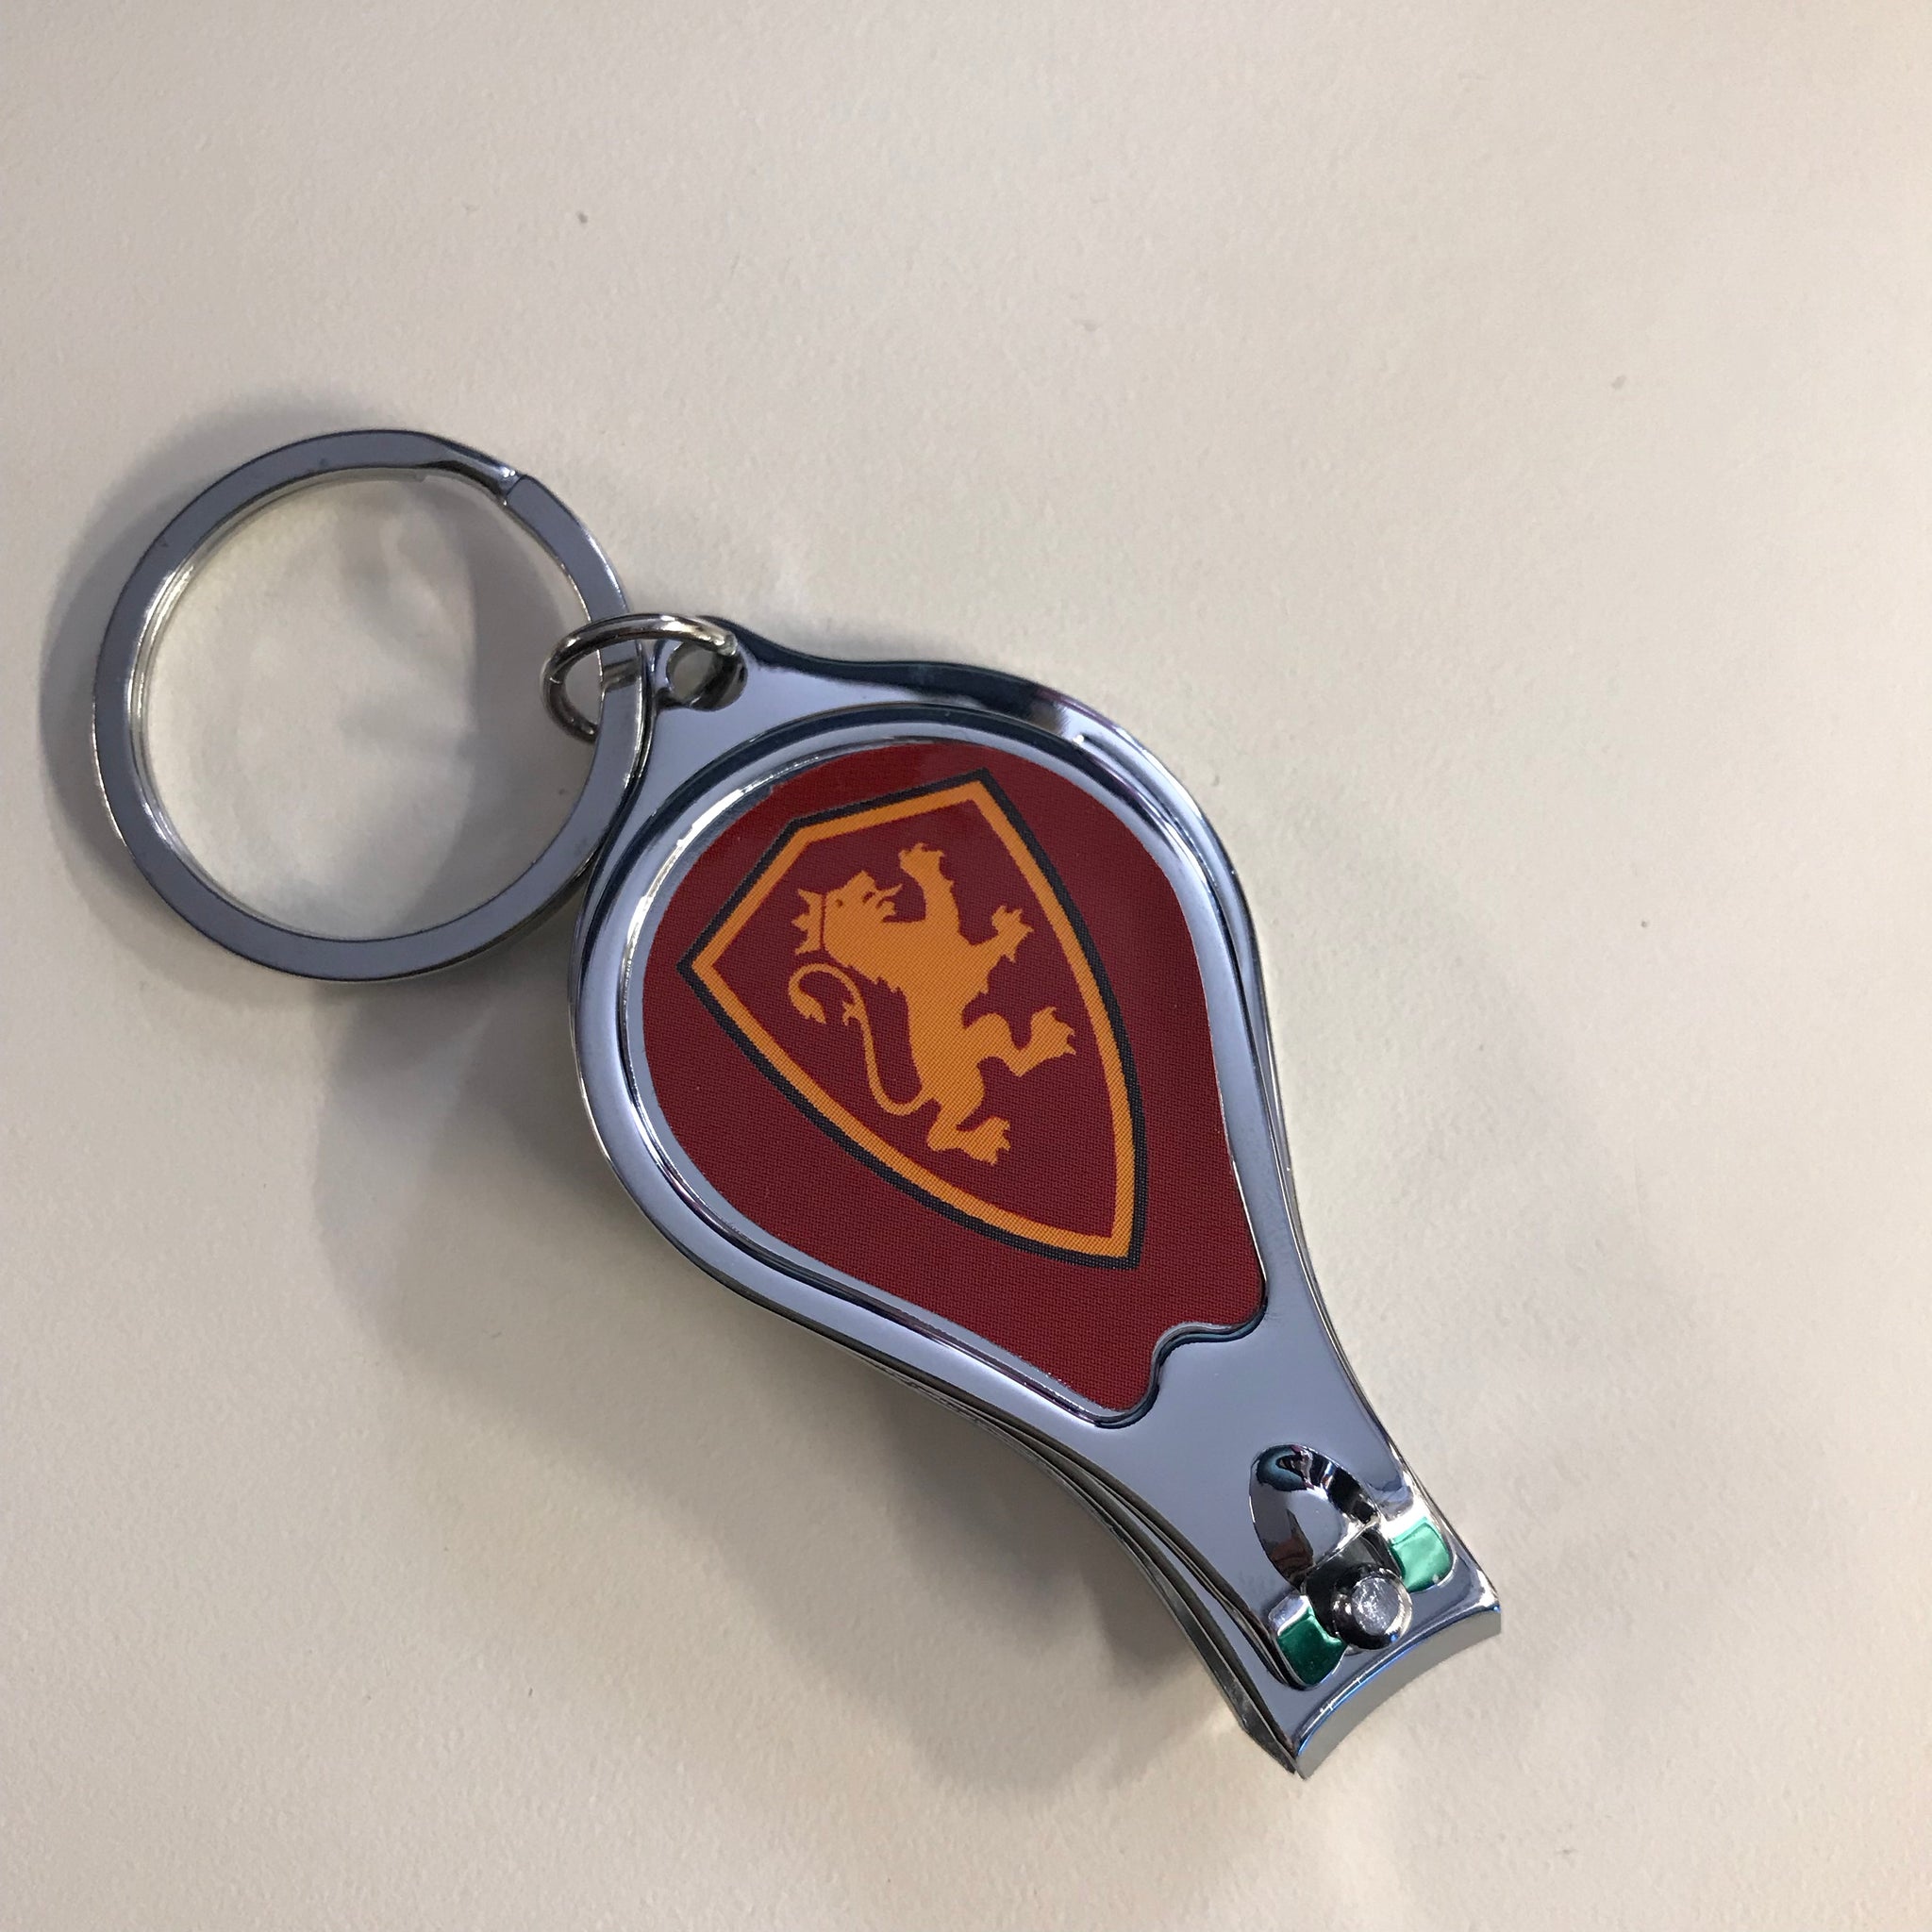 red and gold shield printed on nail clippers